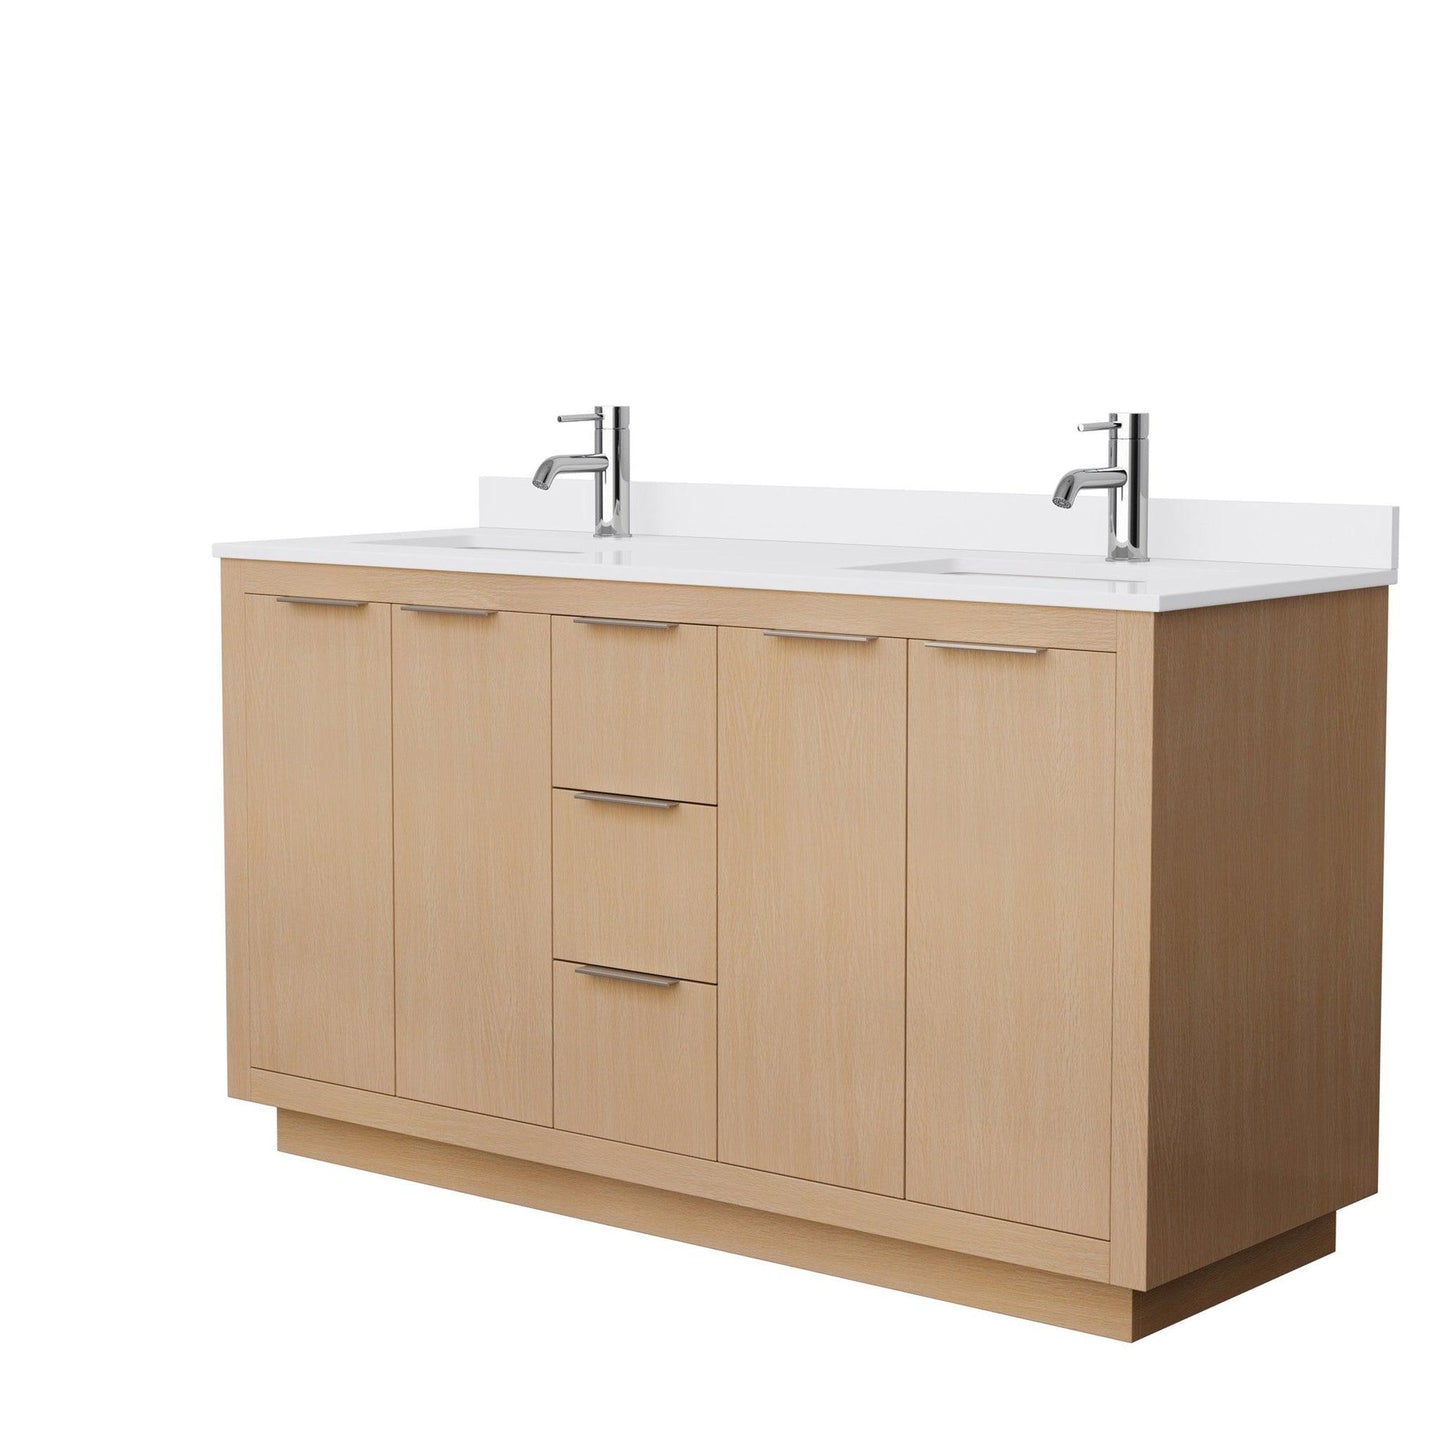 Wyndham Collection Maroni 60" Double Bathroom Vanity in Light Straw, White Cultured Marble Countertop, Undermount Square Sinks